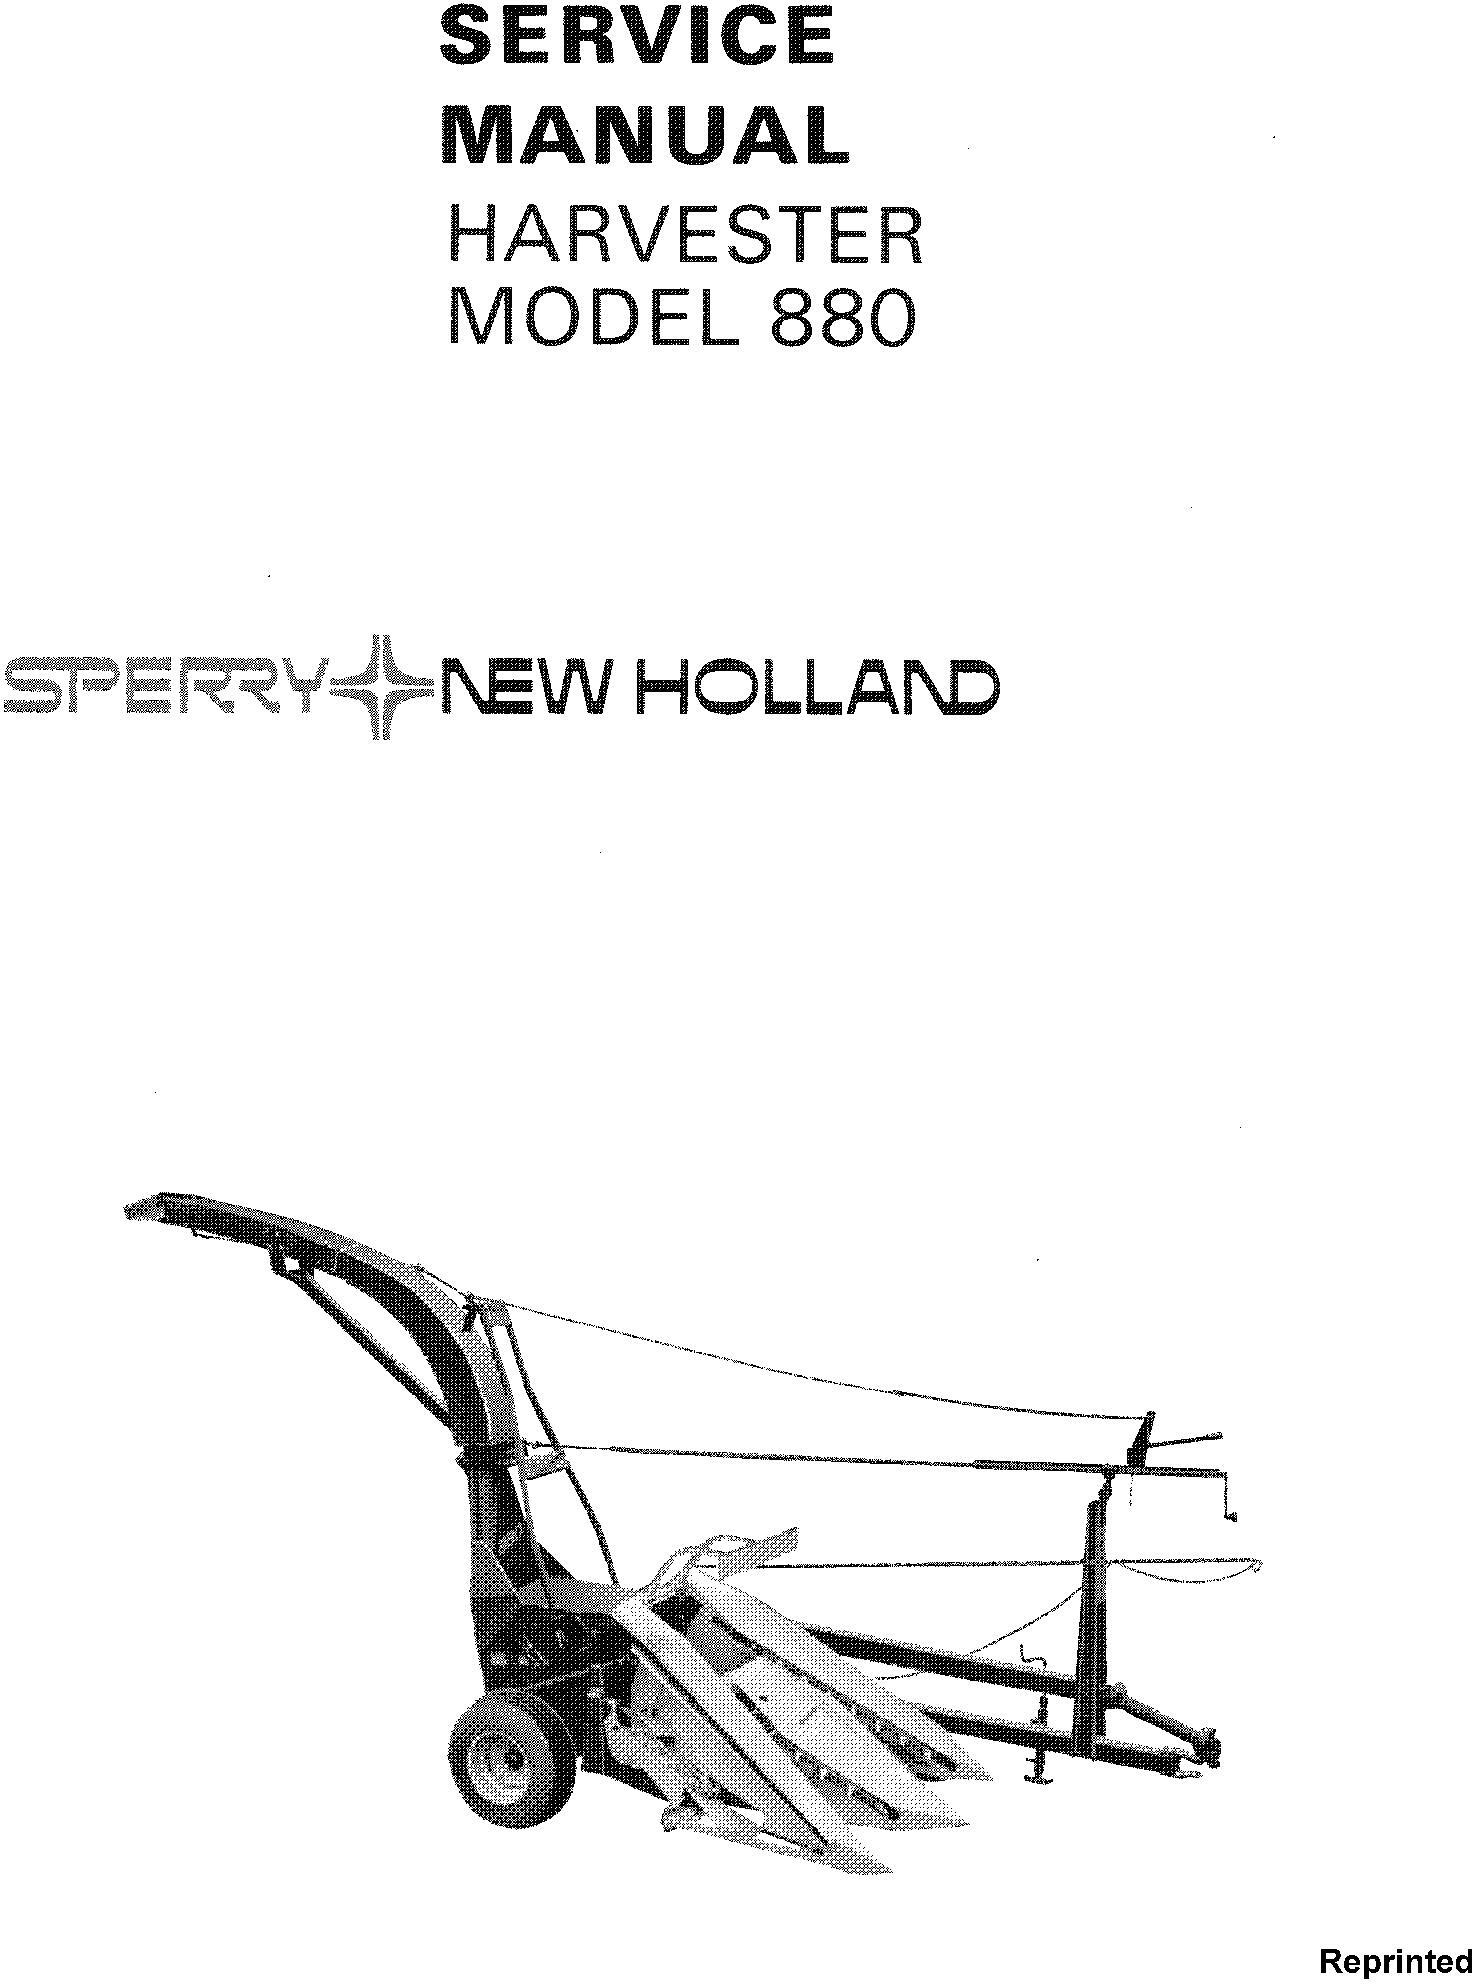 New Holland 880 Forage Harvester Service Manual